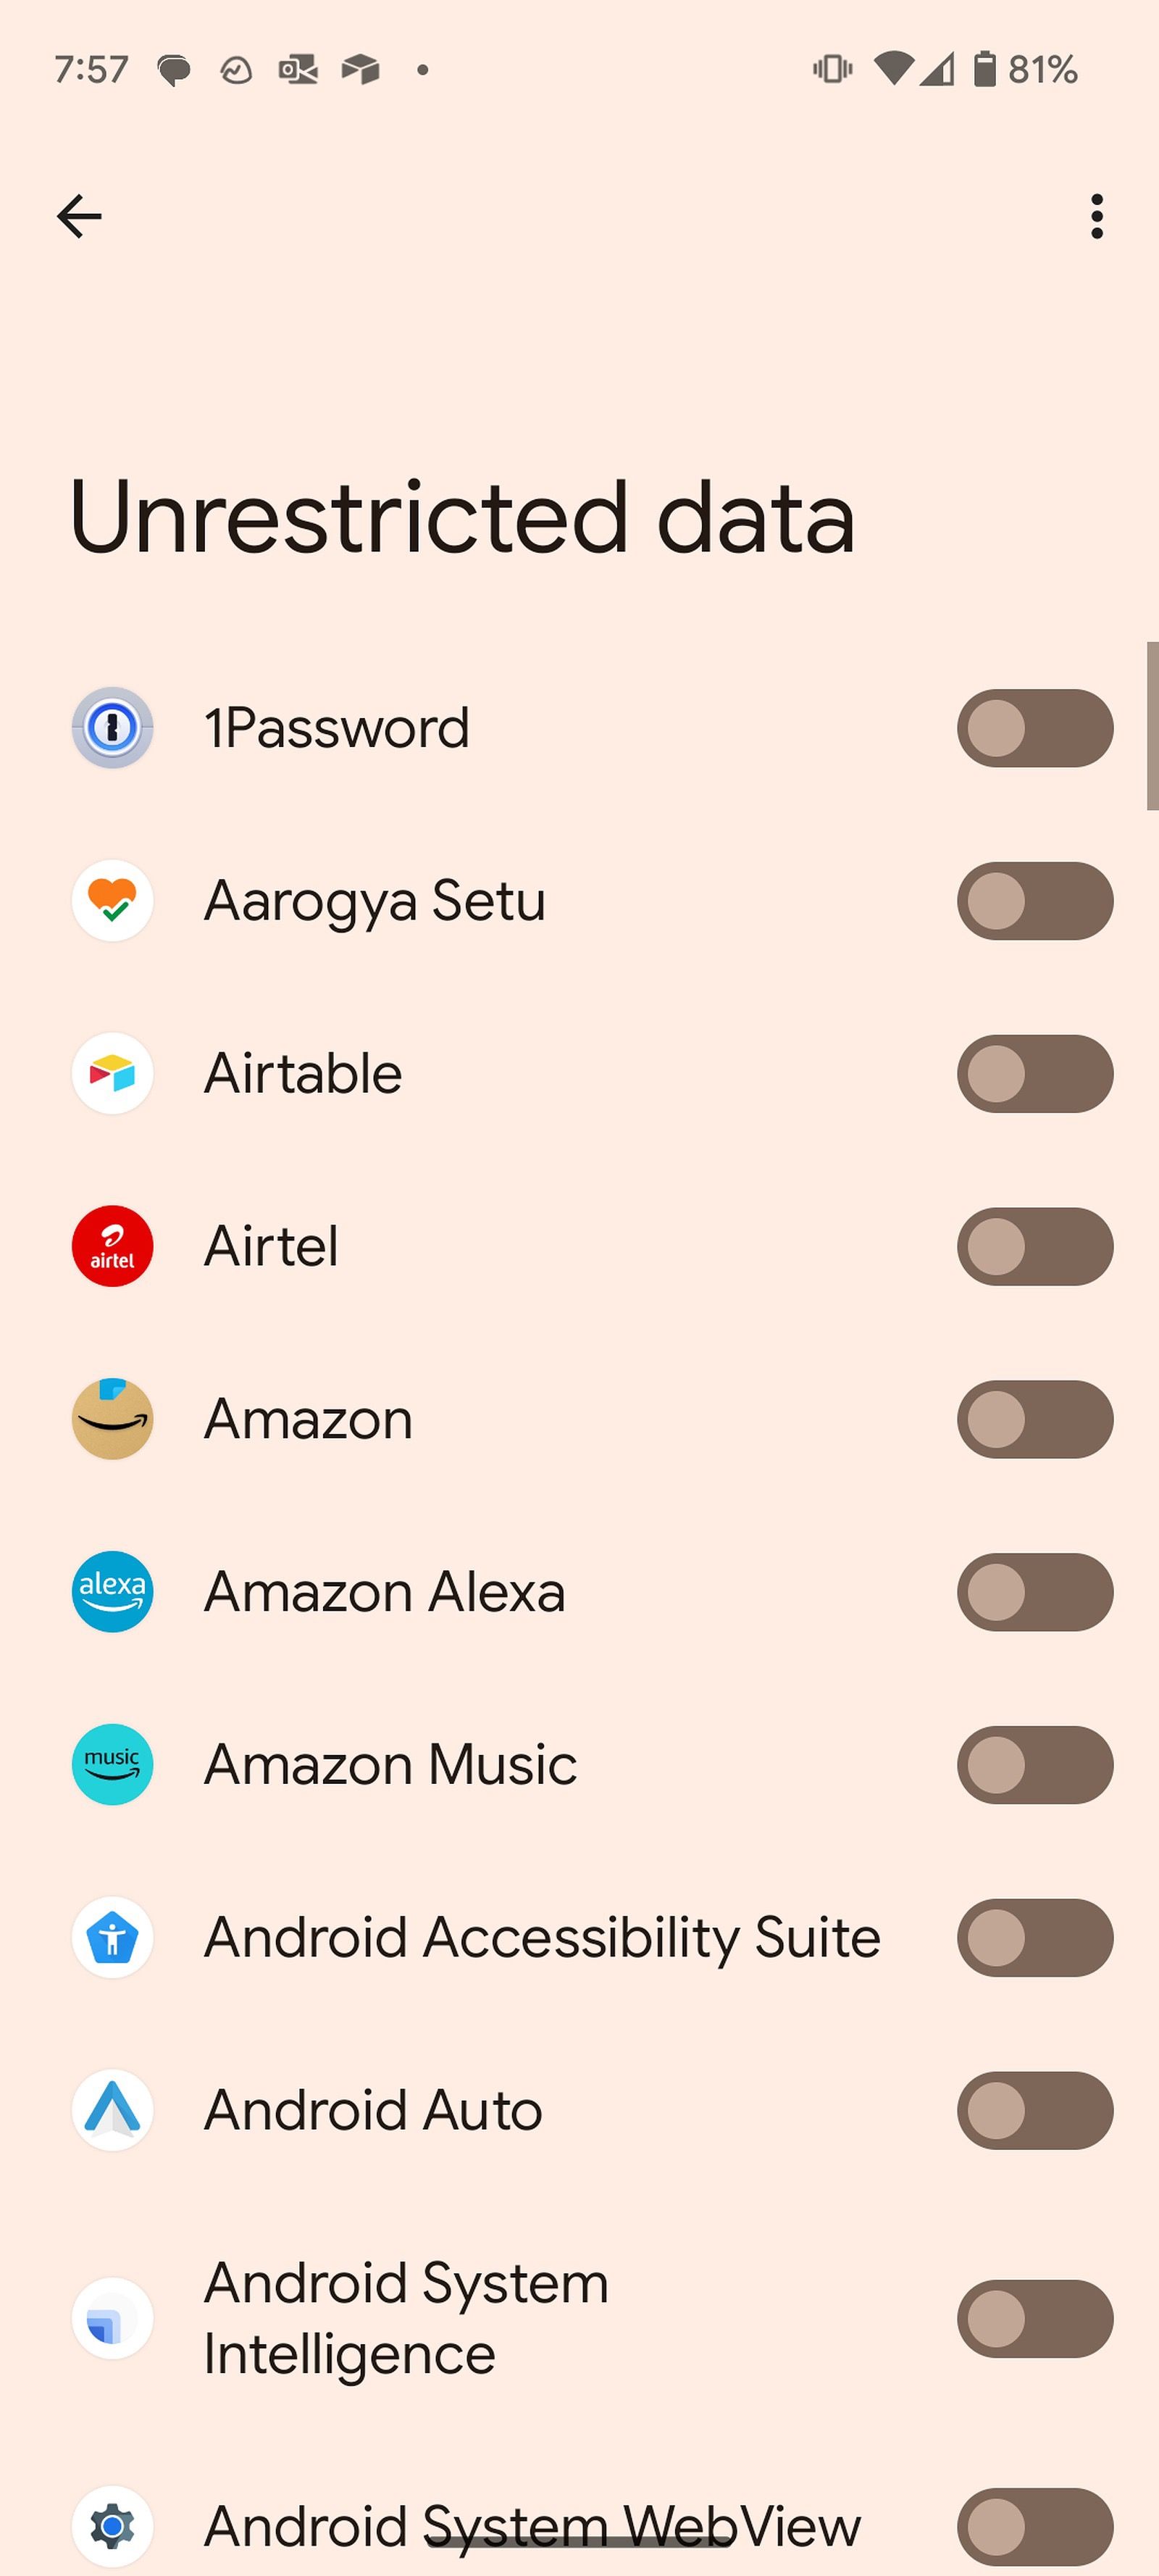 unrestricted data usage for selected apps on Android